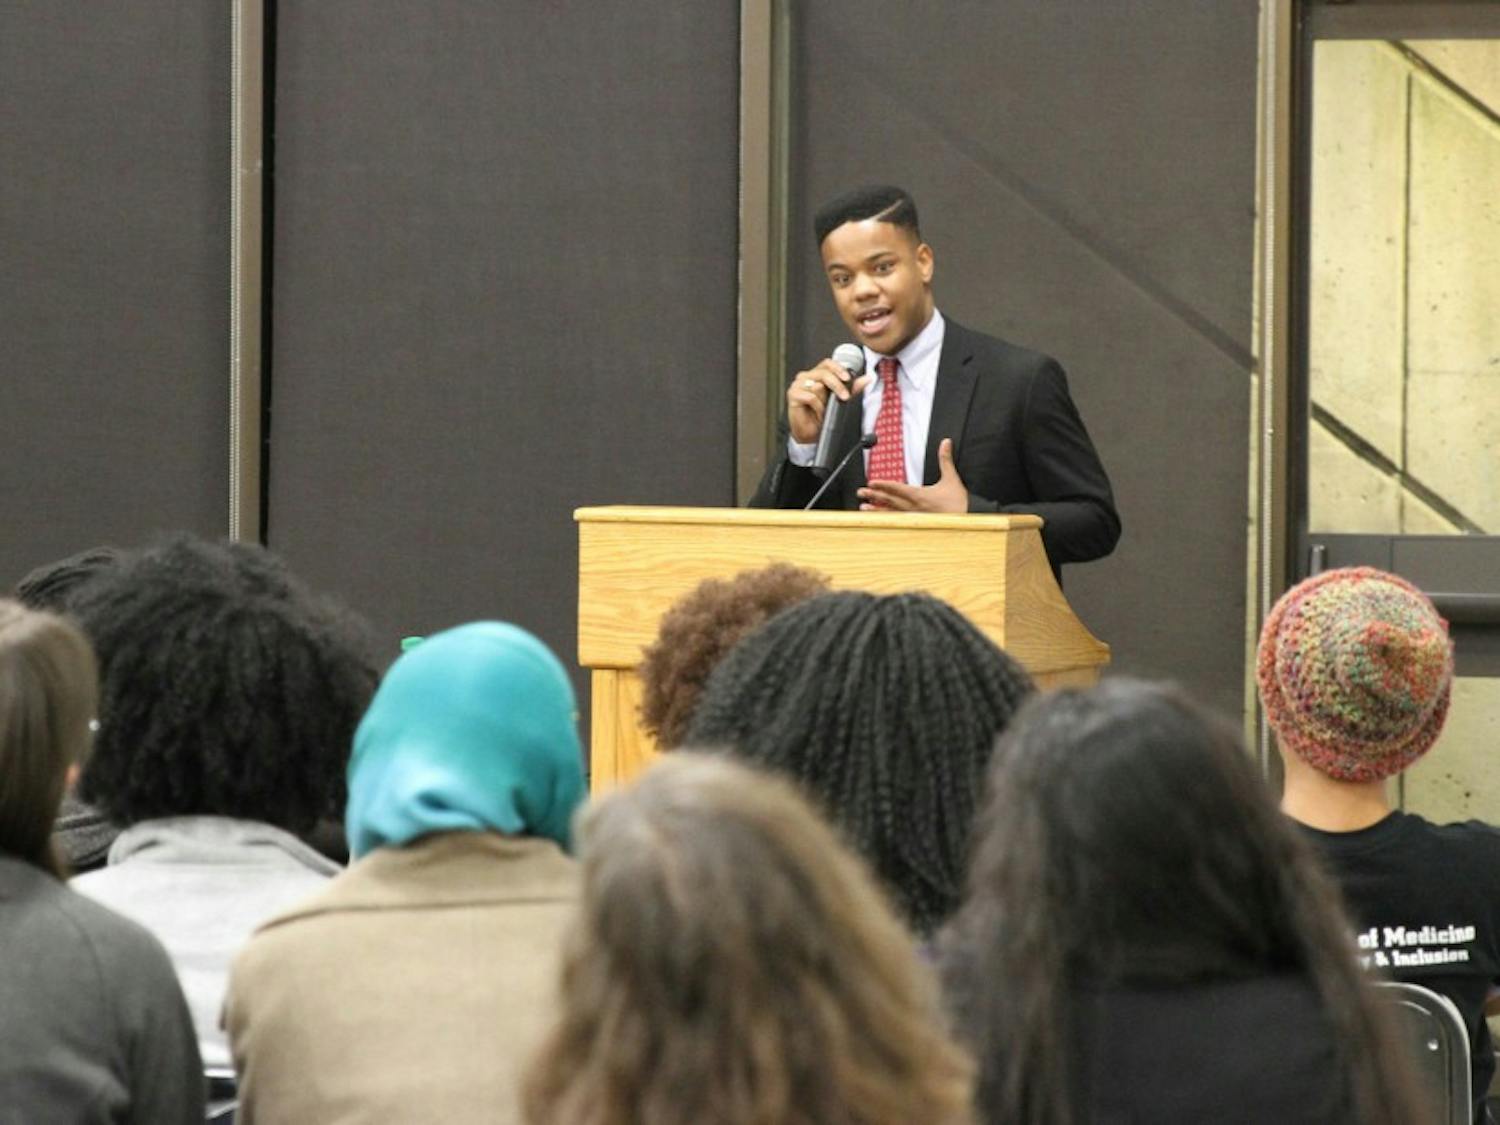 Martese Johnson, a senior at Virginia, reflected on his experience as a black student at the university.